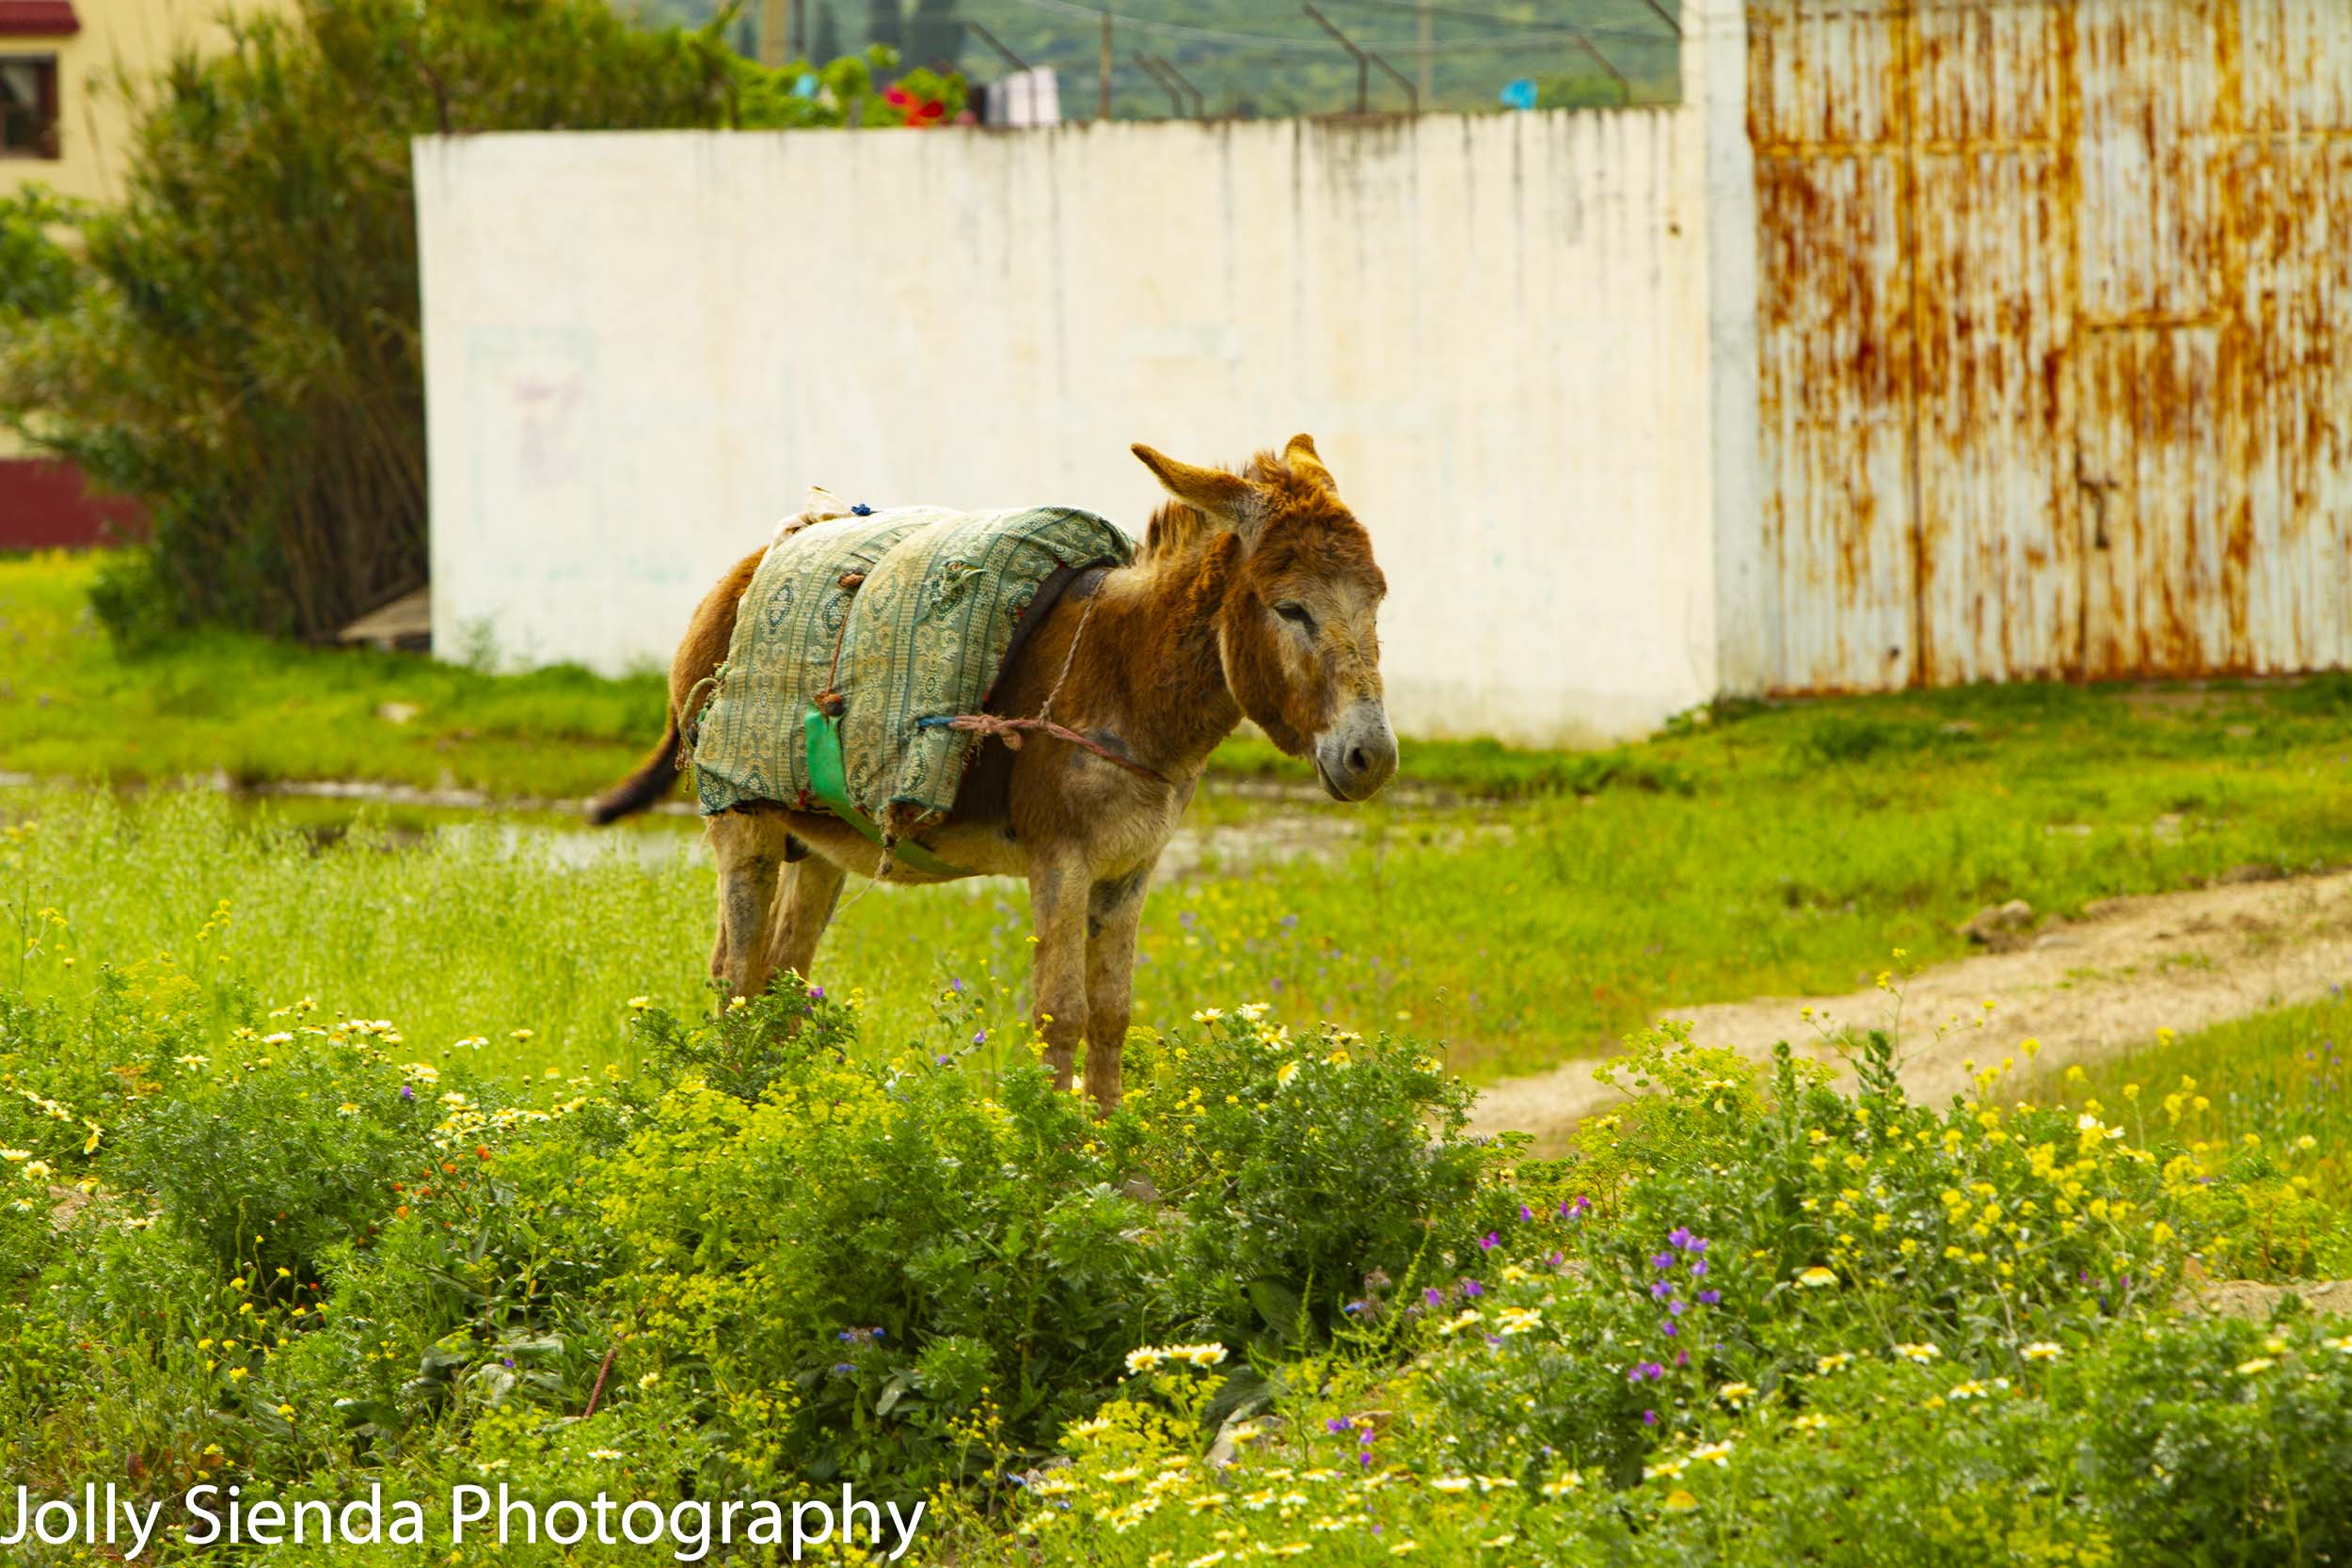 Donkey wears a blanket standing next to wildflowers